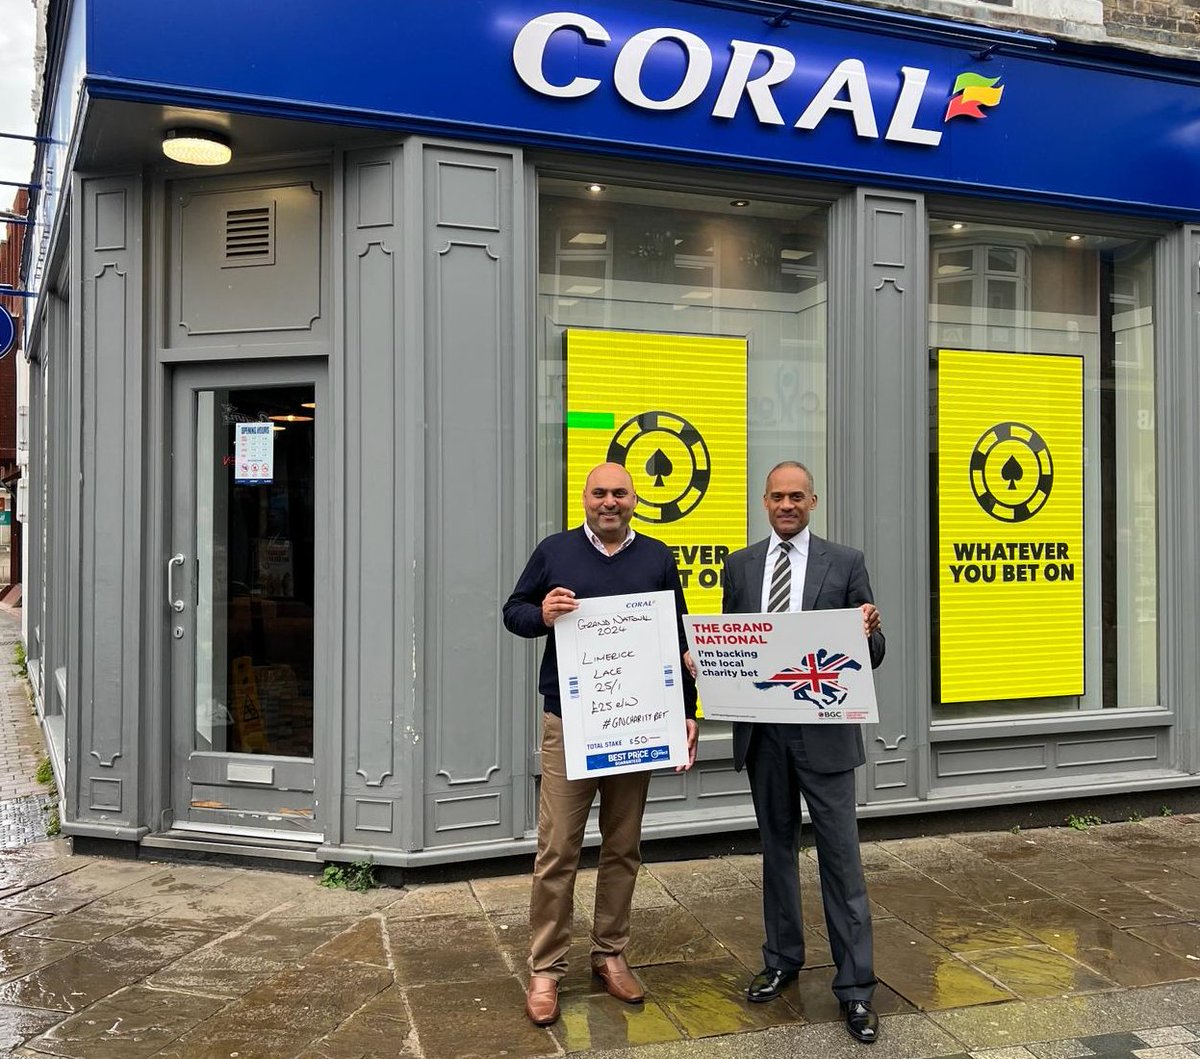 Last week, I visited Coral in Windsor and took part in the Grand National Charity Bet Campaign, placing a £50 charity bet. Any winnings, or a £250 donation from the @BetGameCouncil, will go to @SebsActionTrust, who provide support to the families of seriously-ill children.